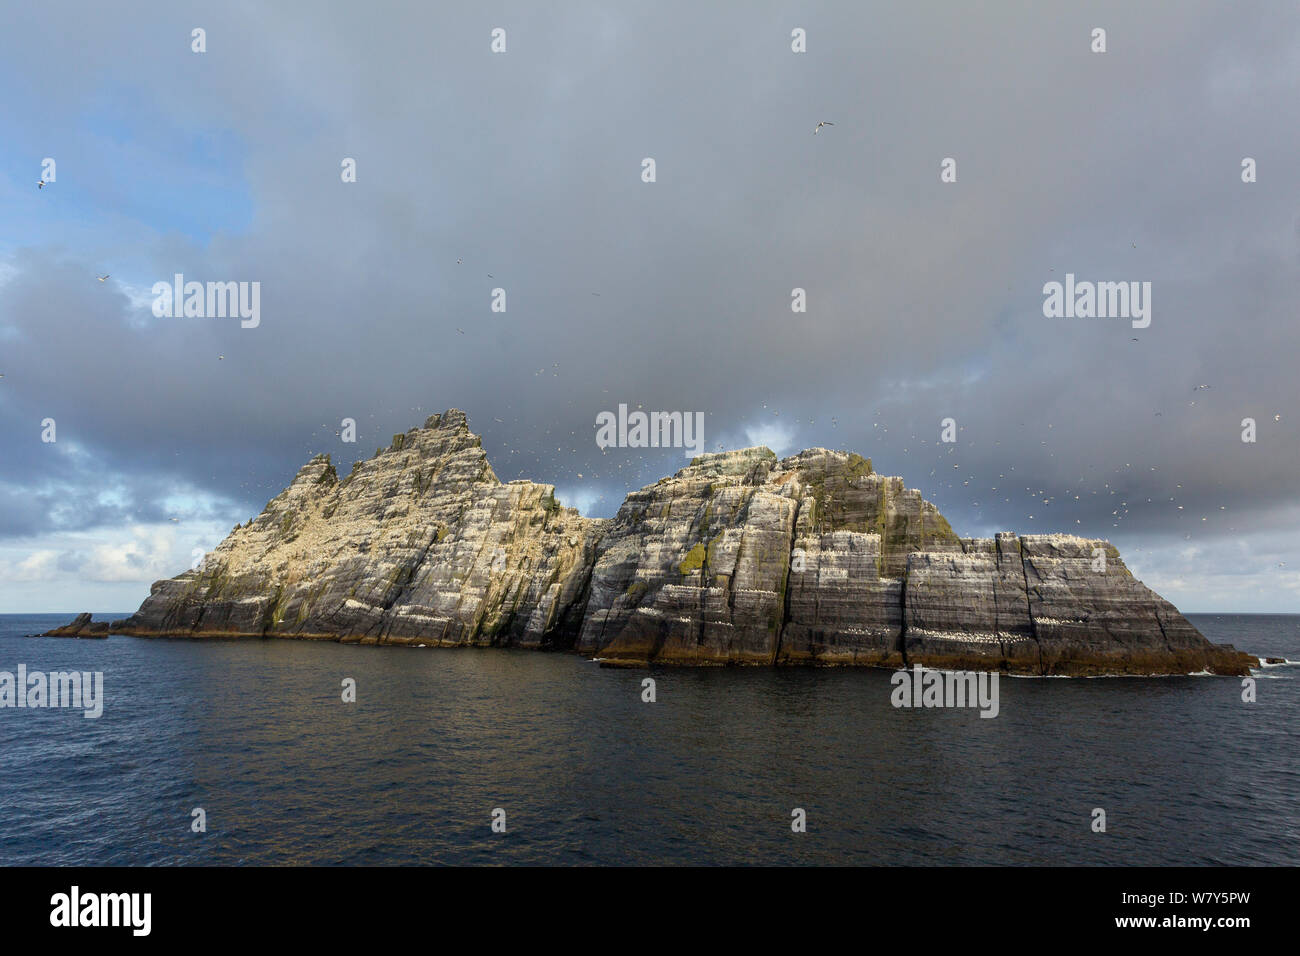 Northern gannet (Morus bassanus) breeding colony on the Old Red Sandstone cliffs, with birds wheeling through the air. Little Skellig in the foreground, County Kerry, Ireland. July. Stock Photo